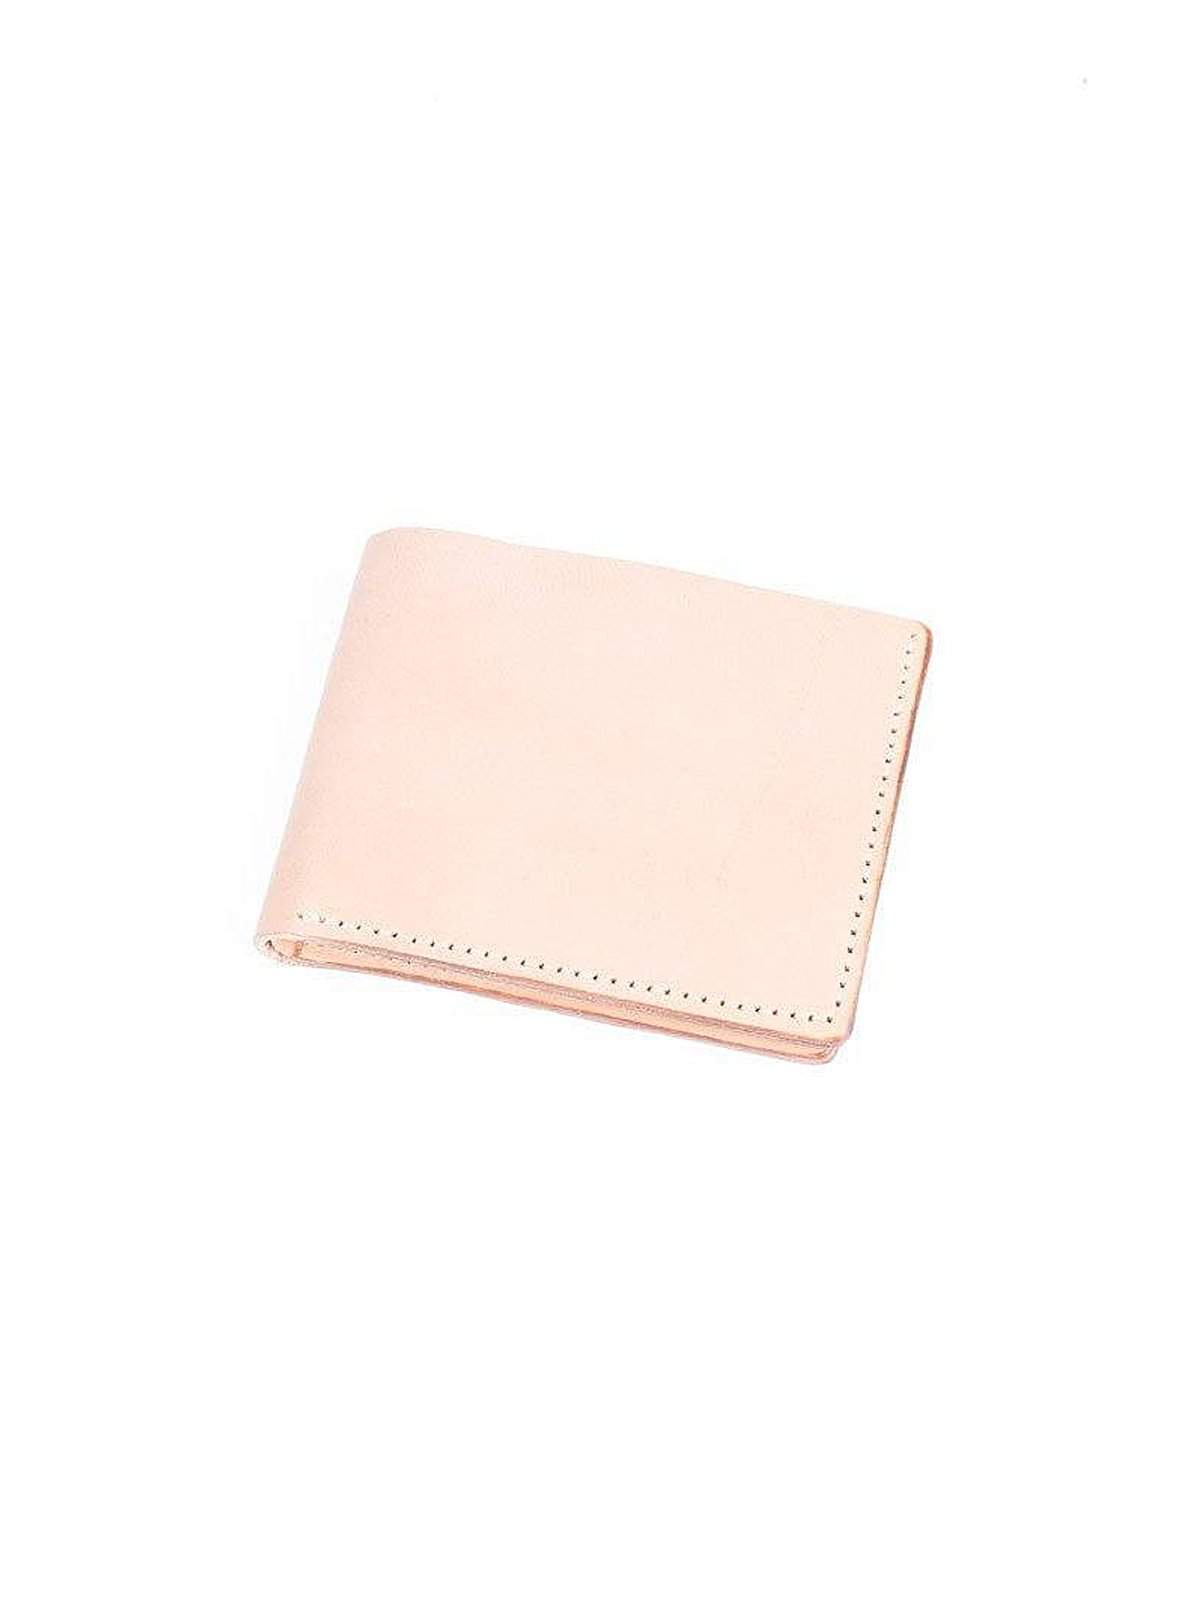 Wood&amp;Faulk Classic Bifold Natural Vegetable Tan Wallet - MORE by Morello Indonesia